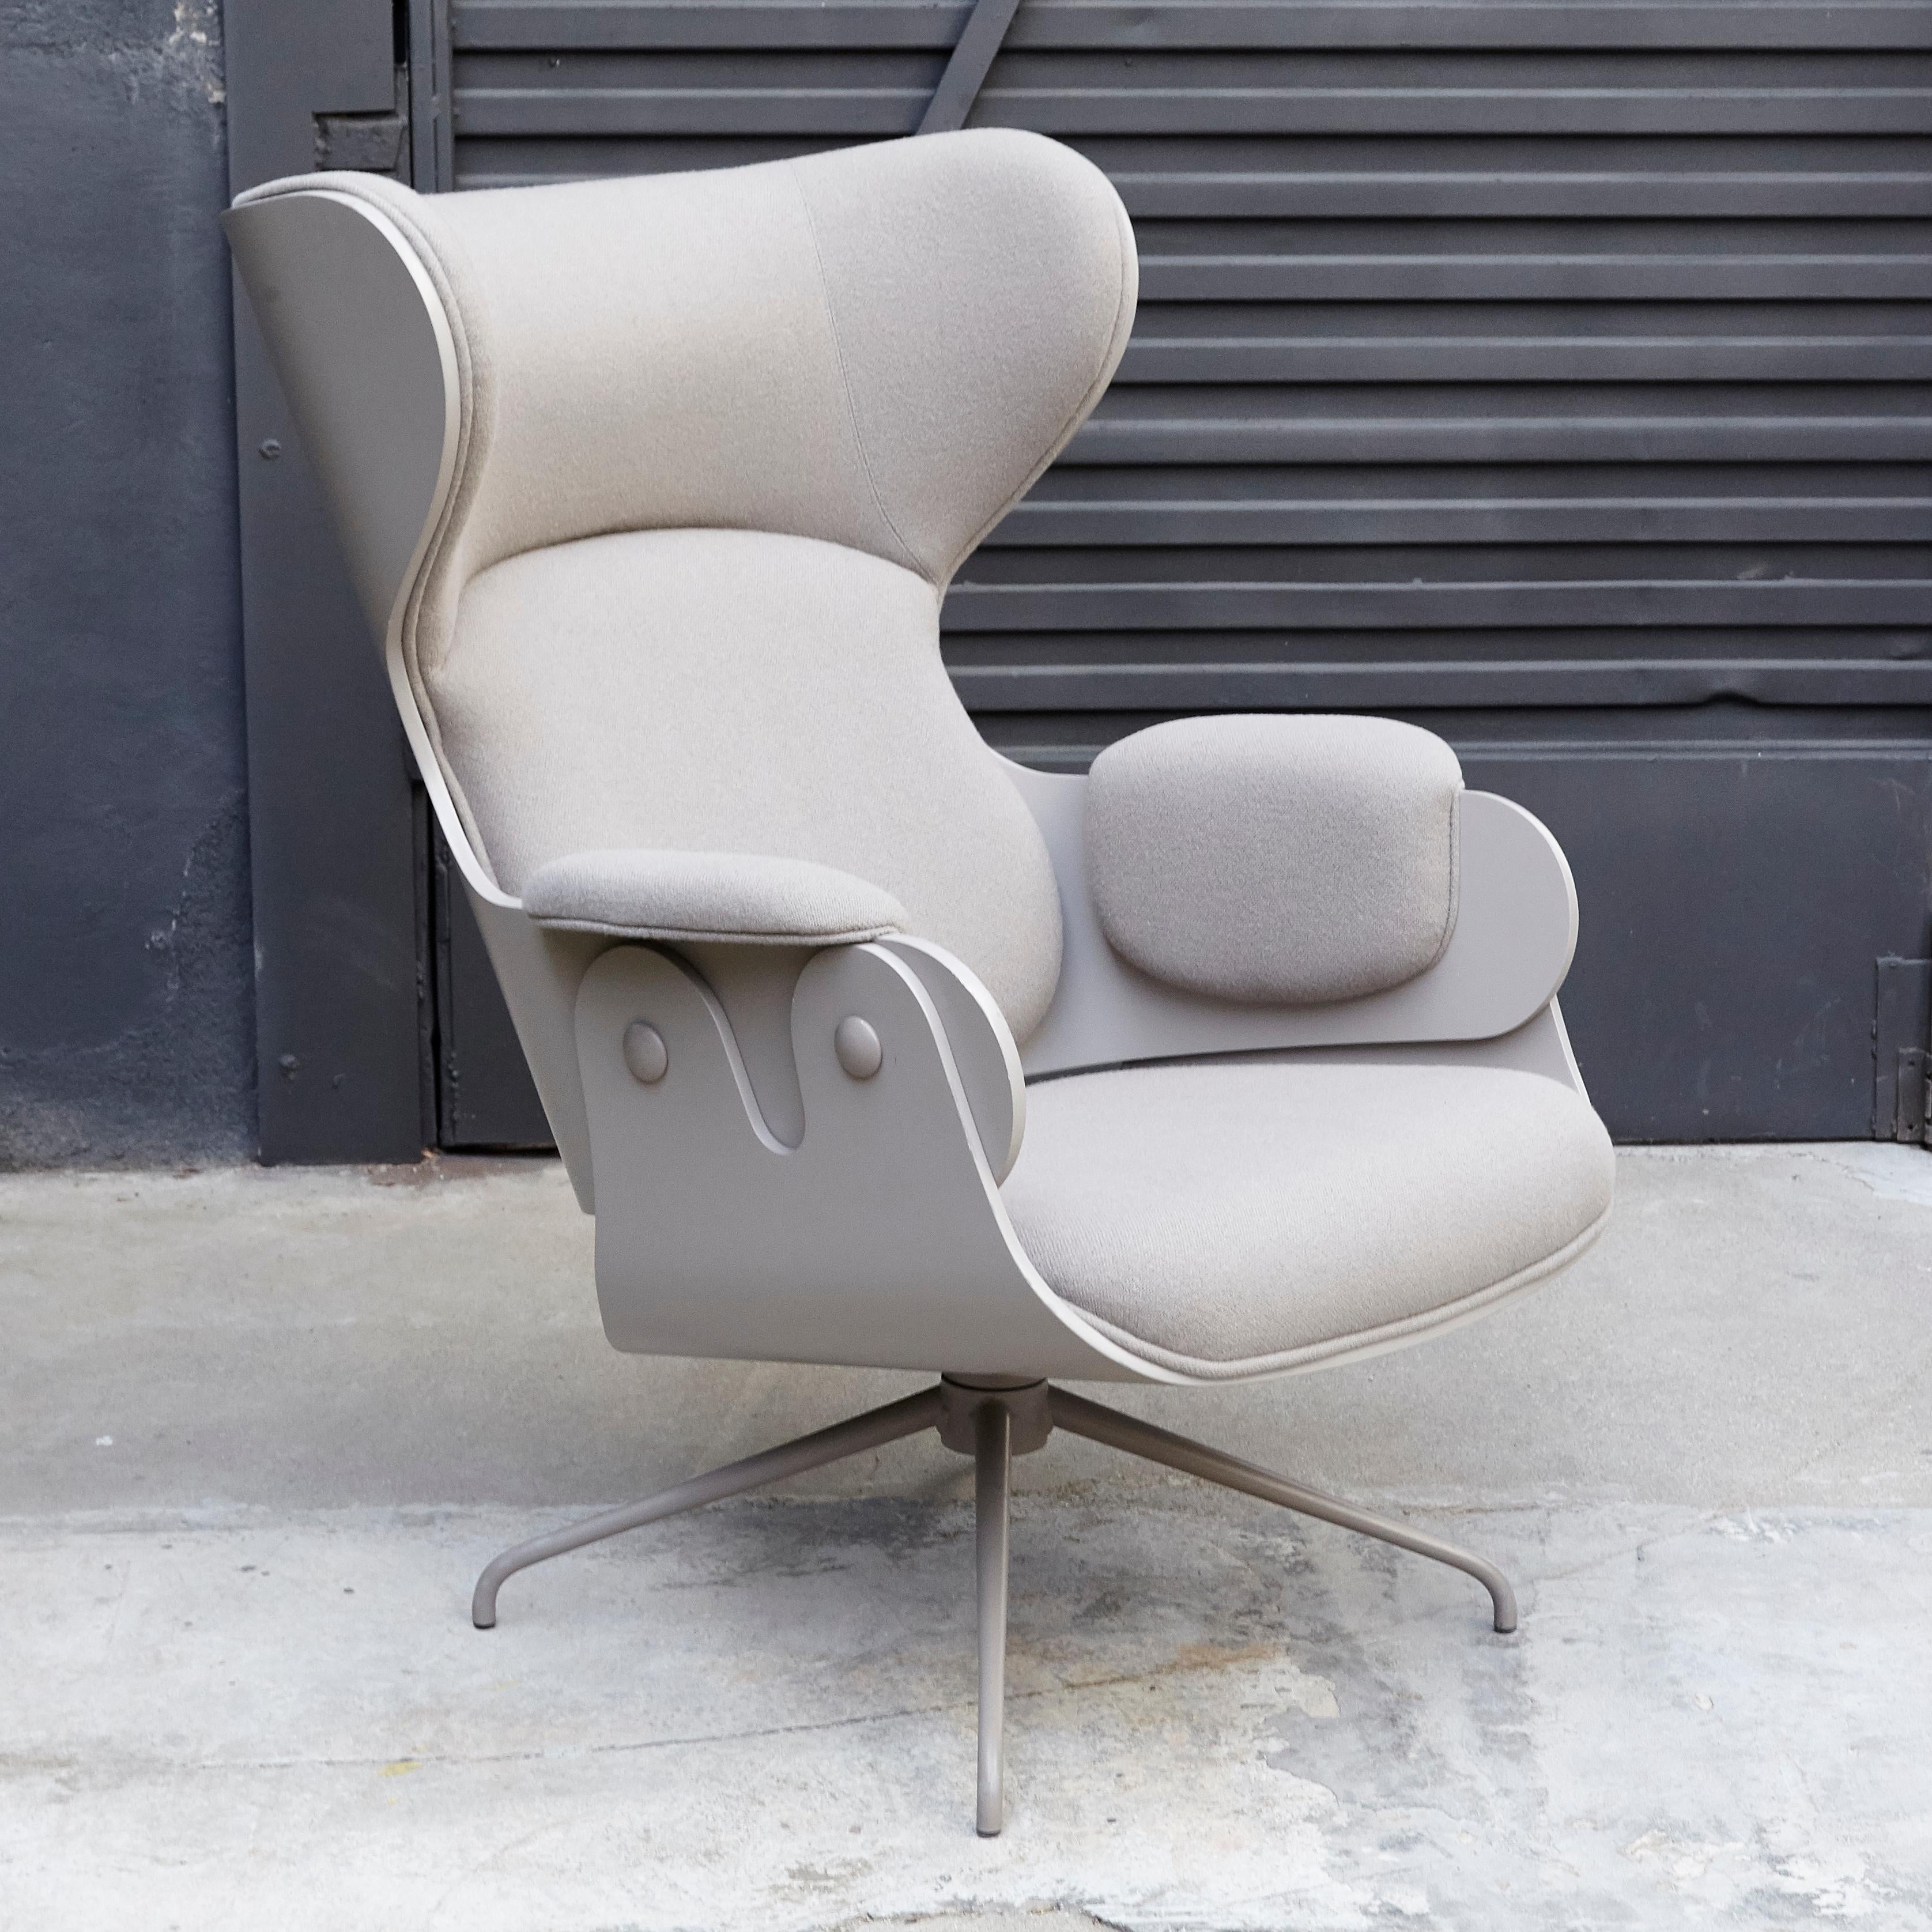 Modern Jaime Hayon, Contemporary, Plywood Grey Upholstery Lounger Armchair